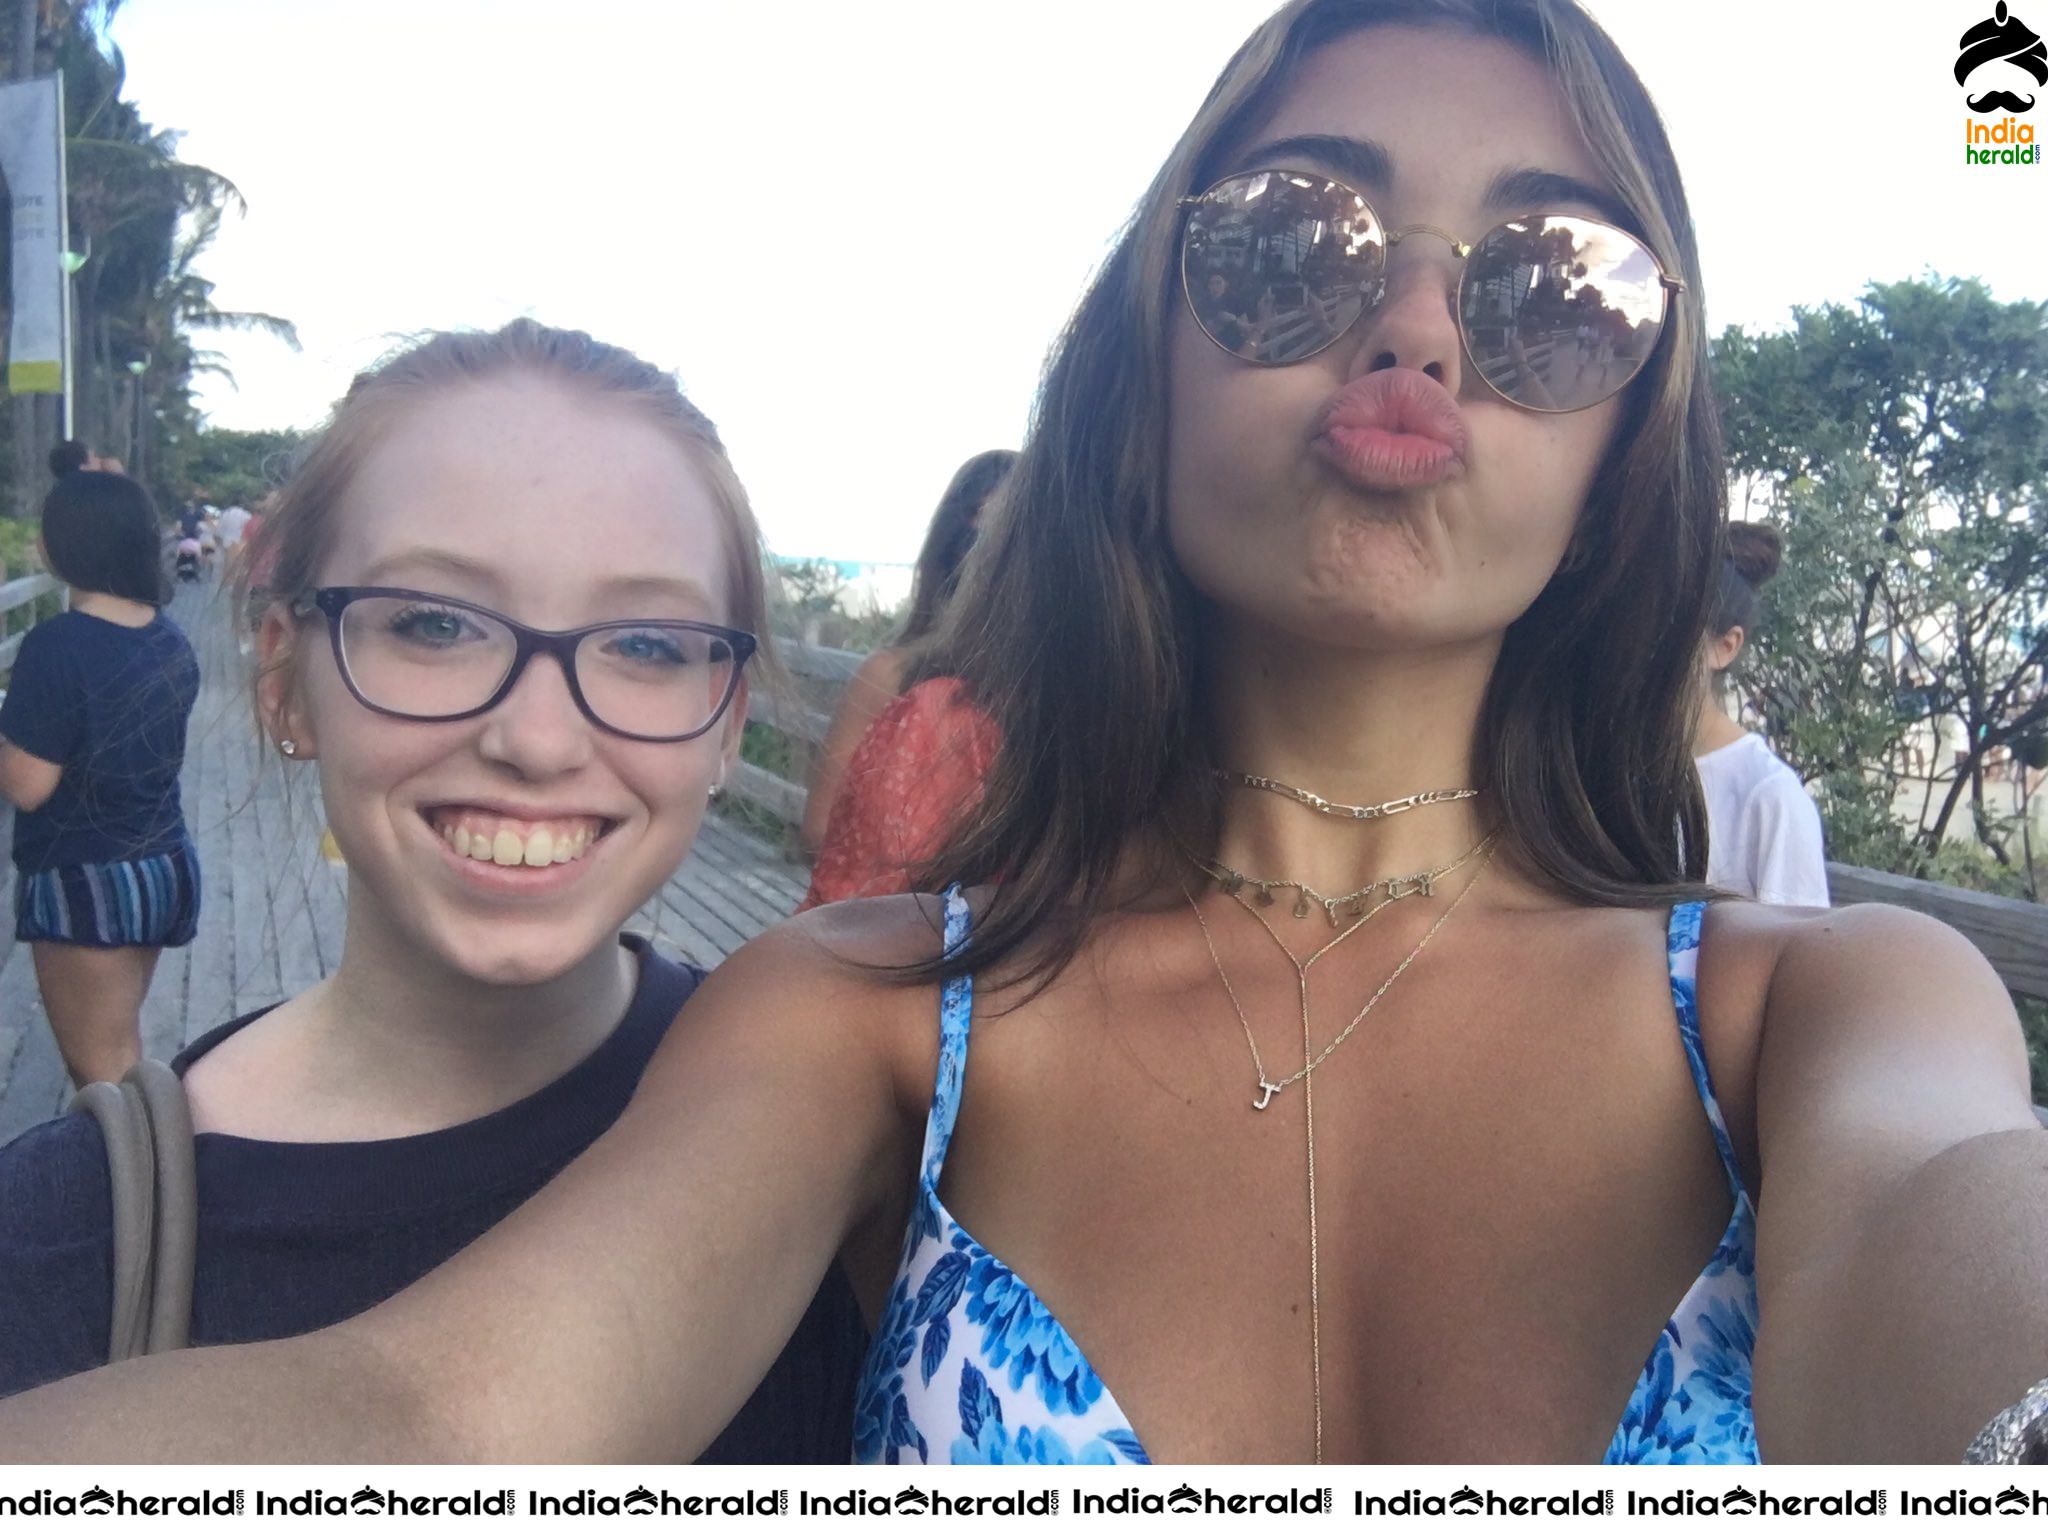 Madison Beer Clicked in Bikini by fans in Miami Set 2